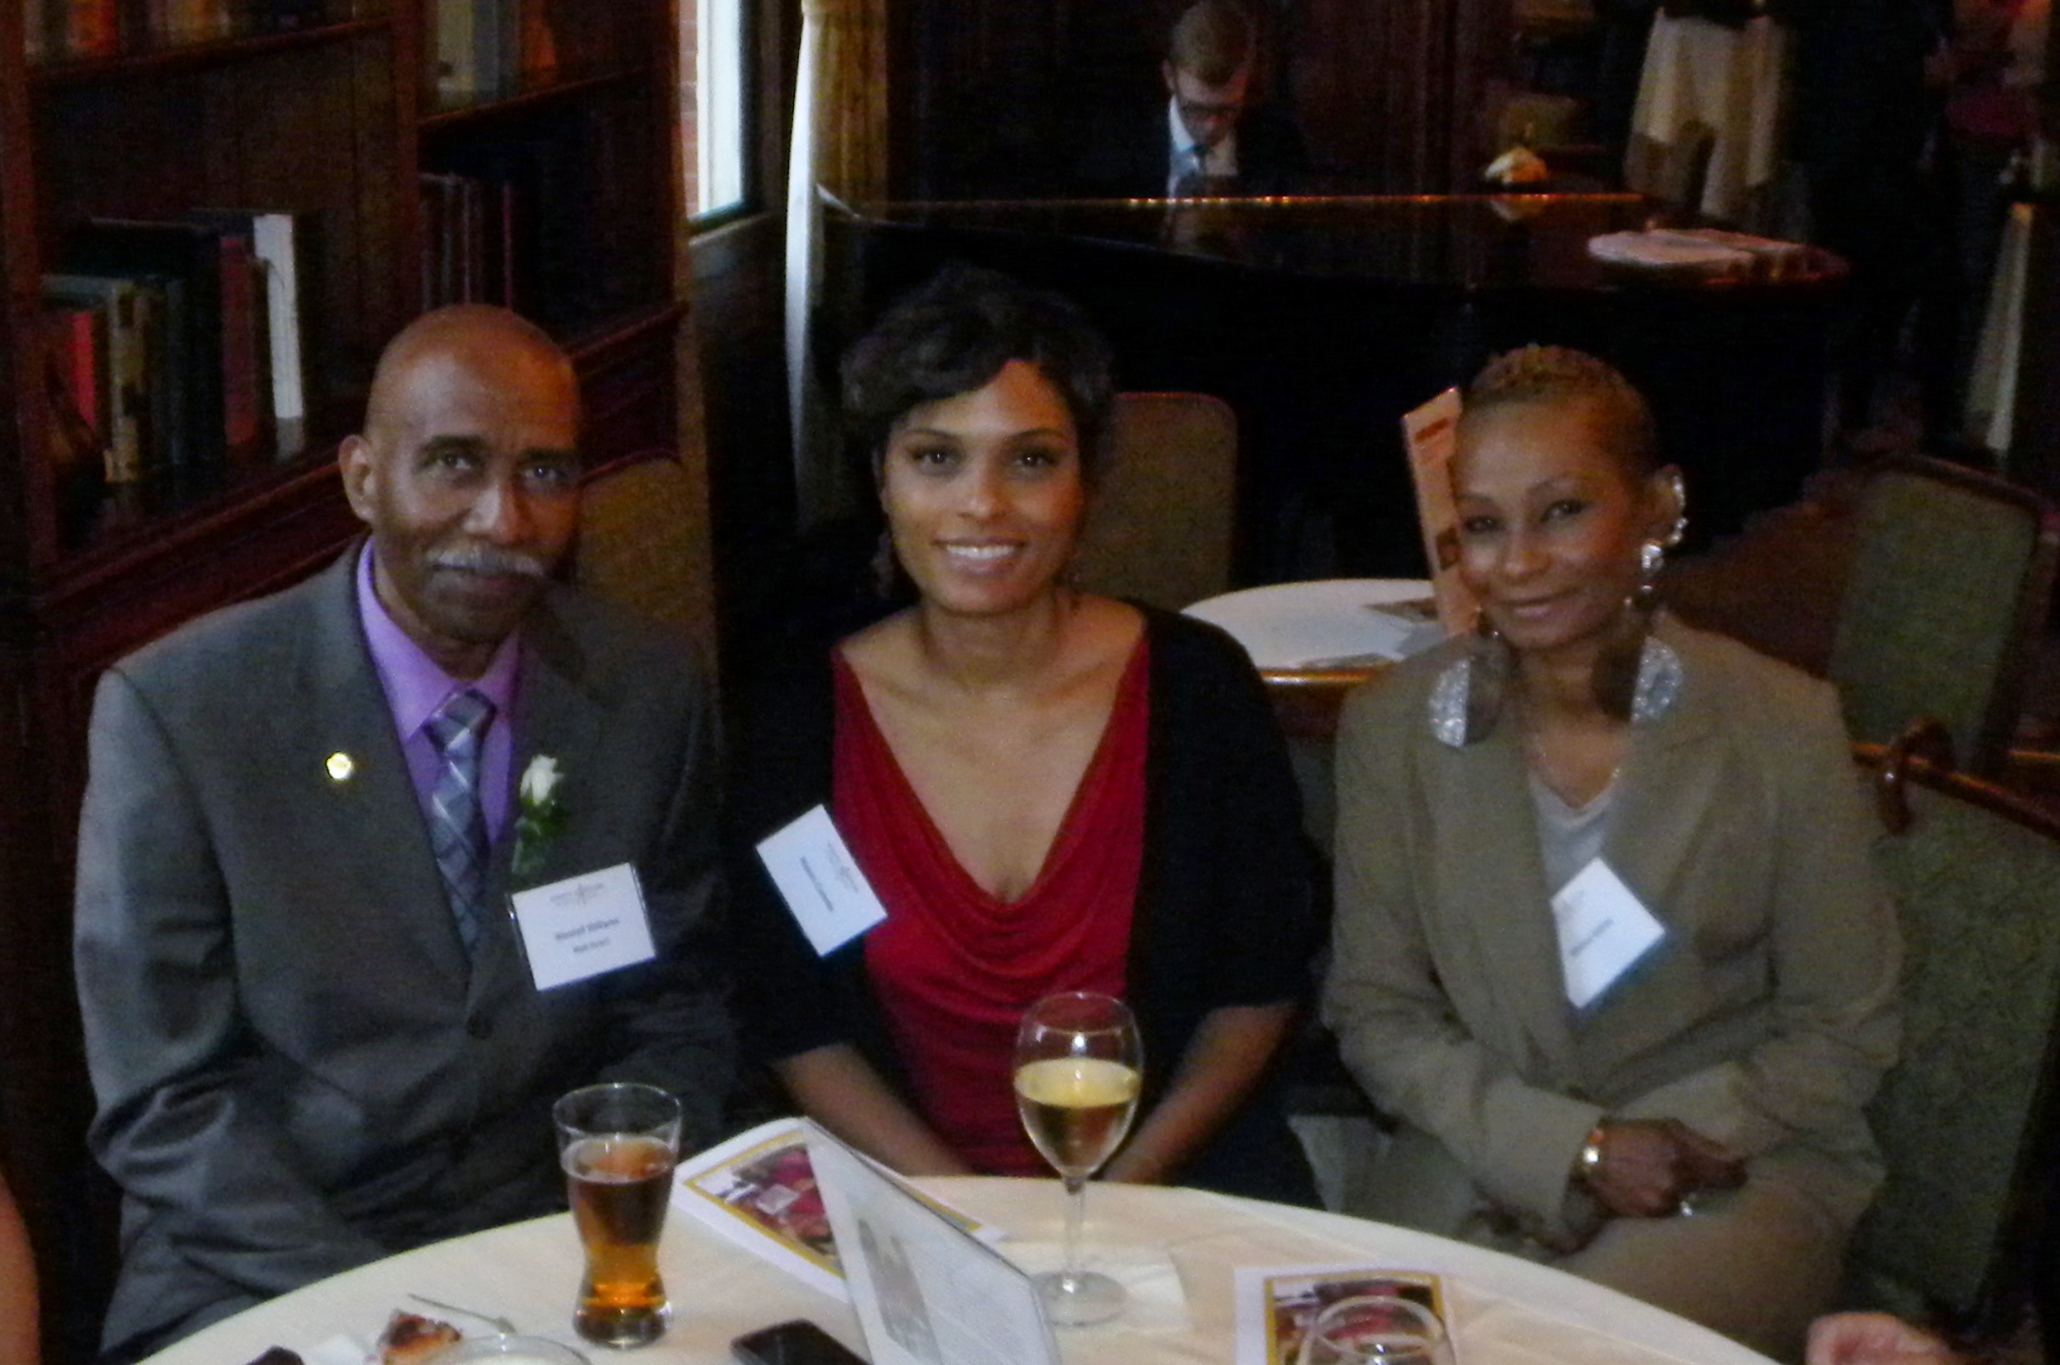 Wendell Williams, recipient of the Joyna Bozzotto Award, enjoys time with his guests